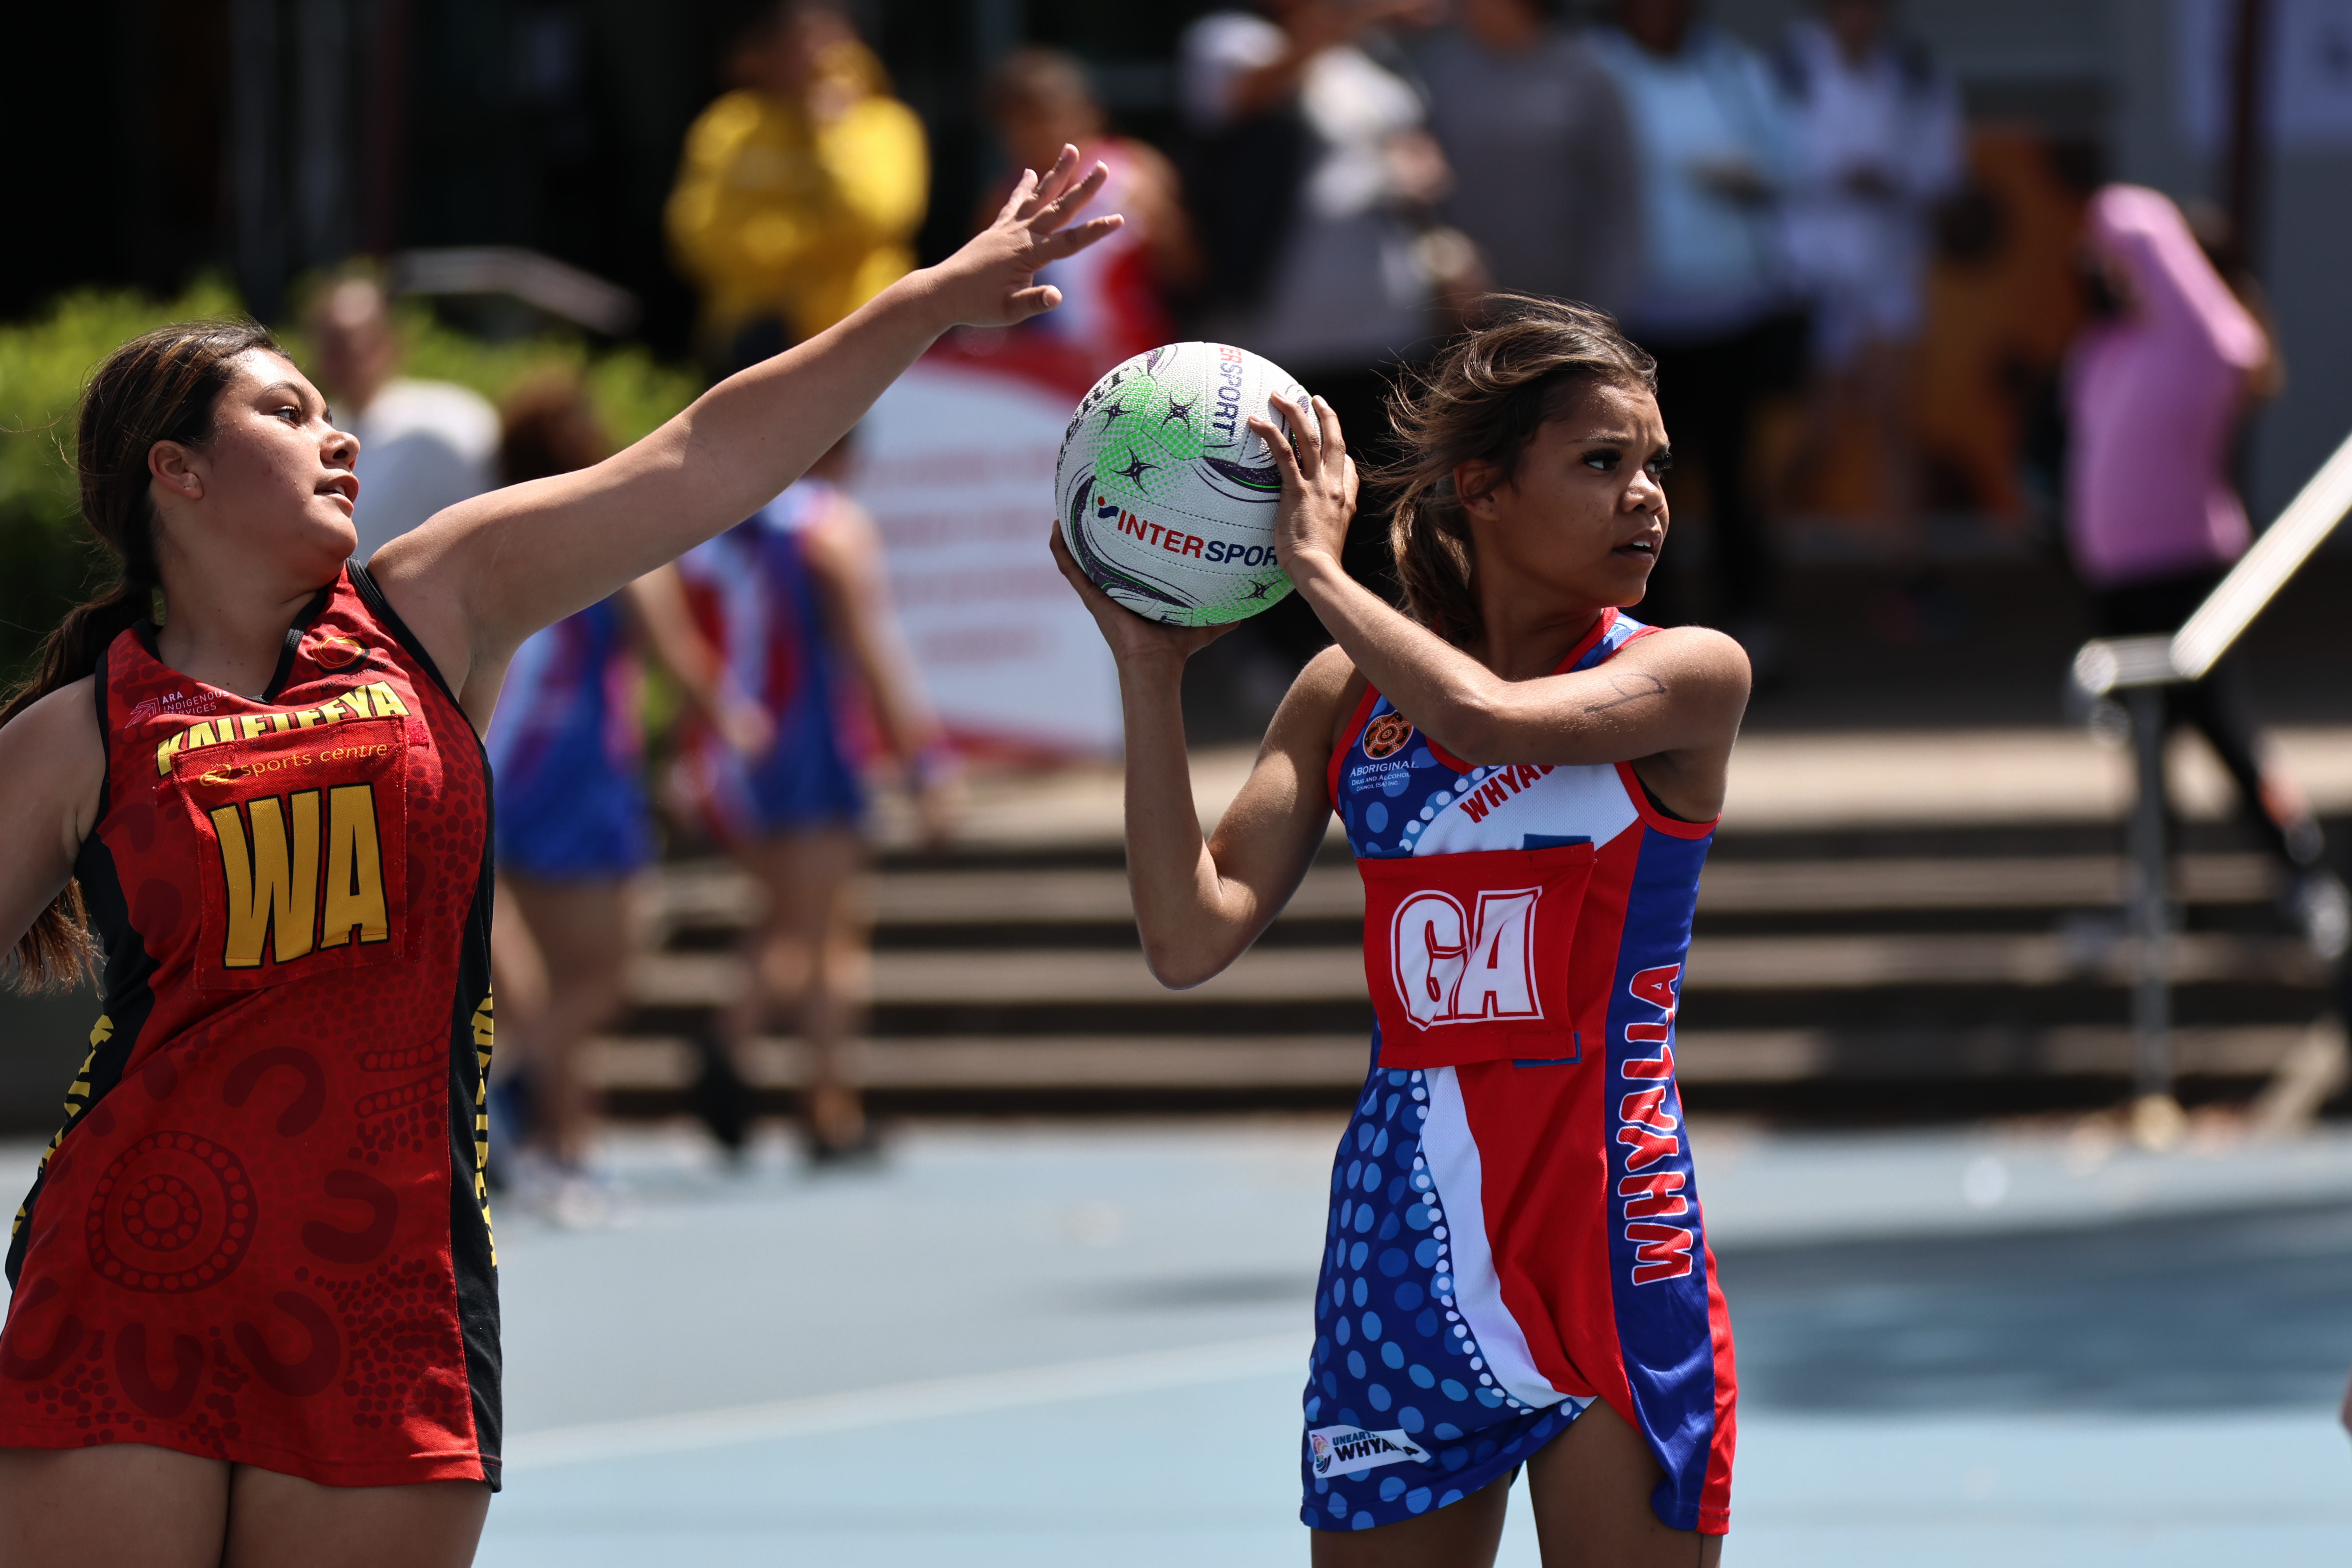 Player holding the ball on her shoulder looking to pass it whilst being defended by opposition player with her arm out. 